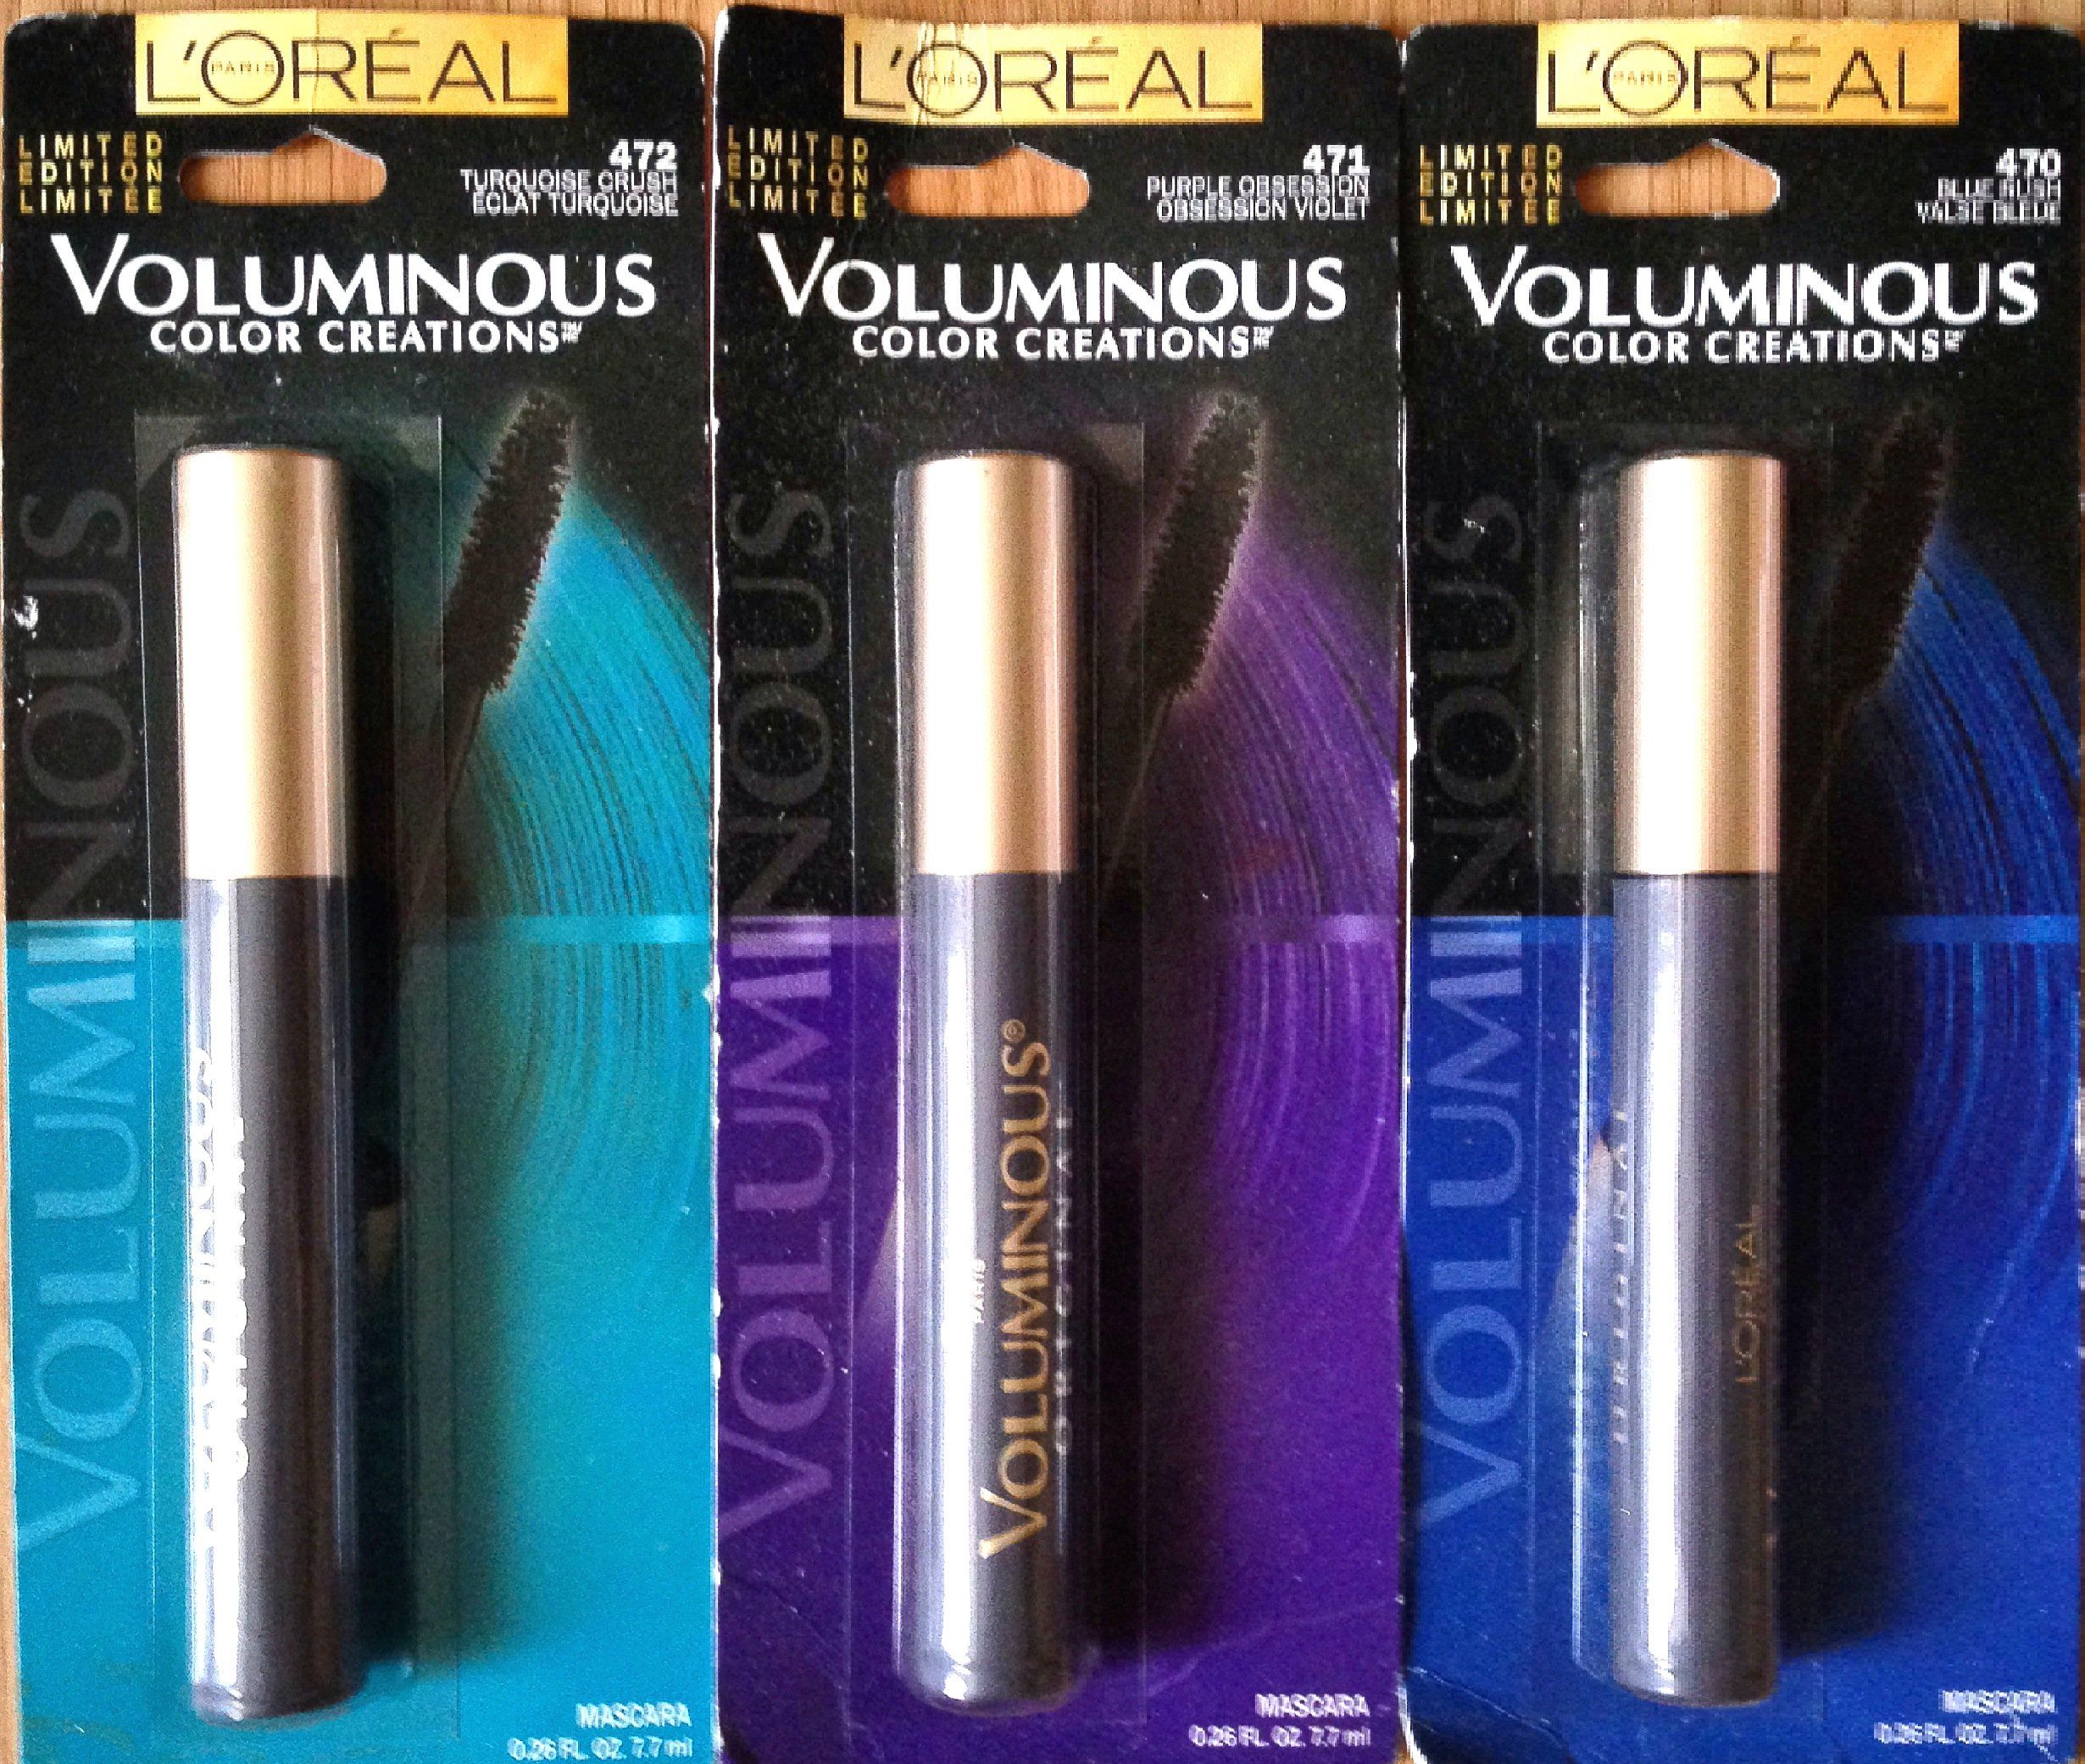 L'oreal Voluminous Color Creations Mascara Limited Edition- Blue ...